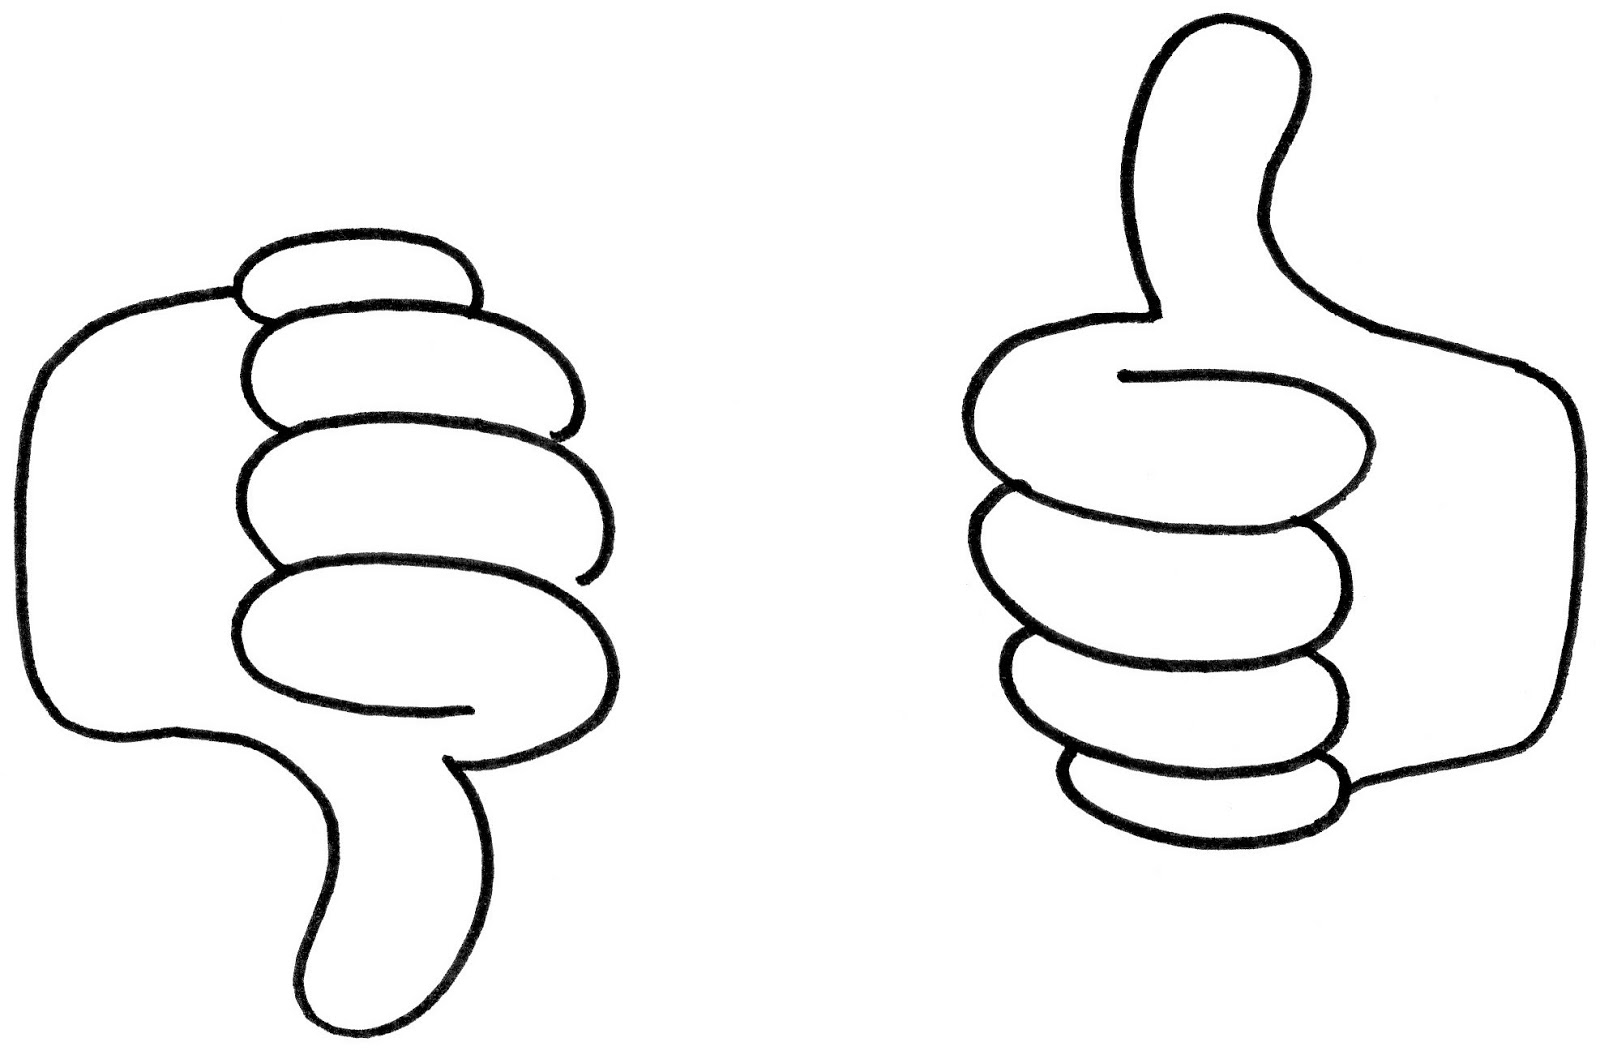 Thumbs Sideways Clipart Black and White